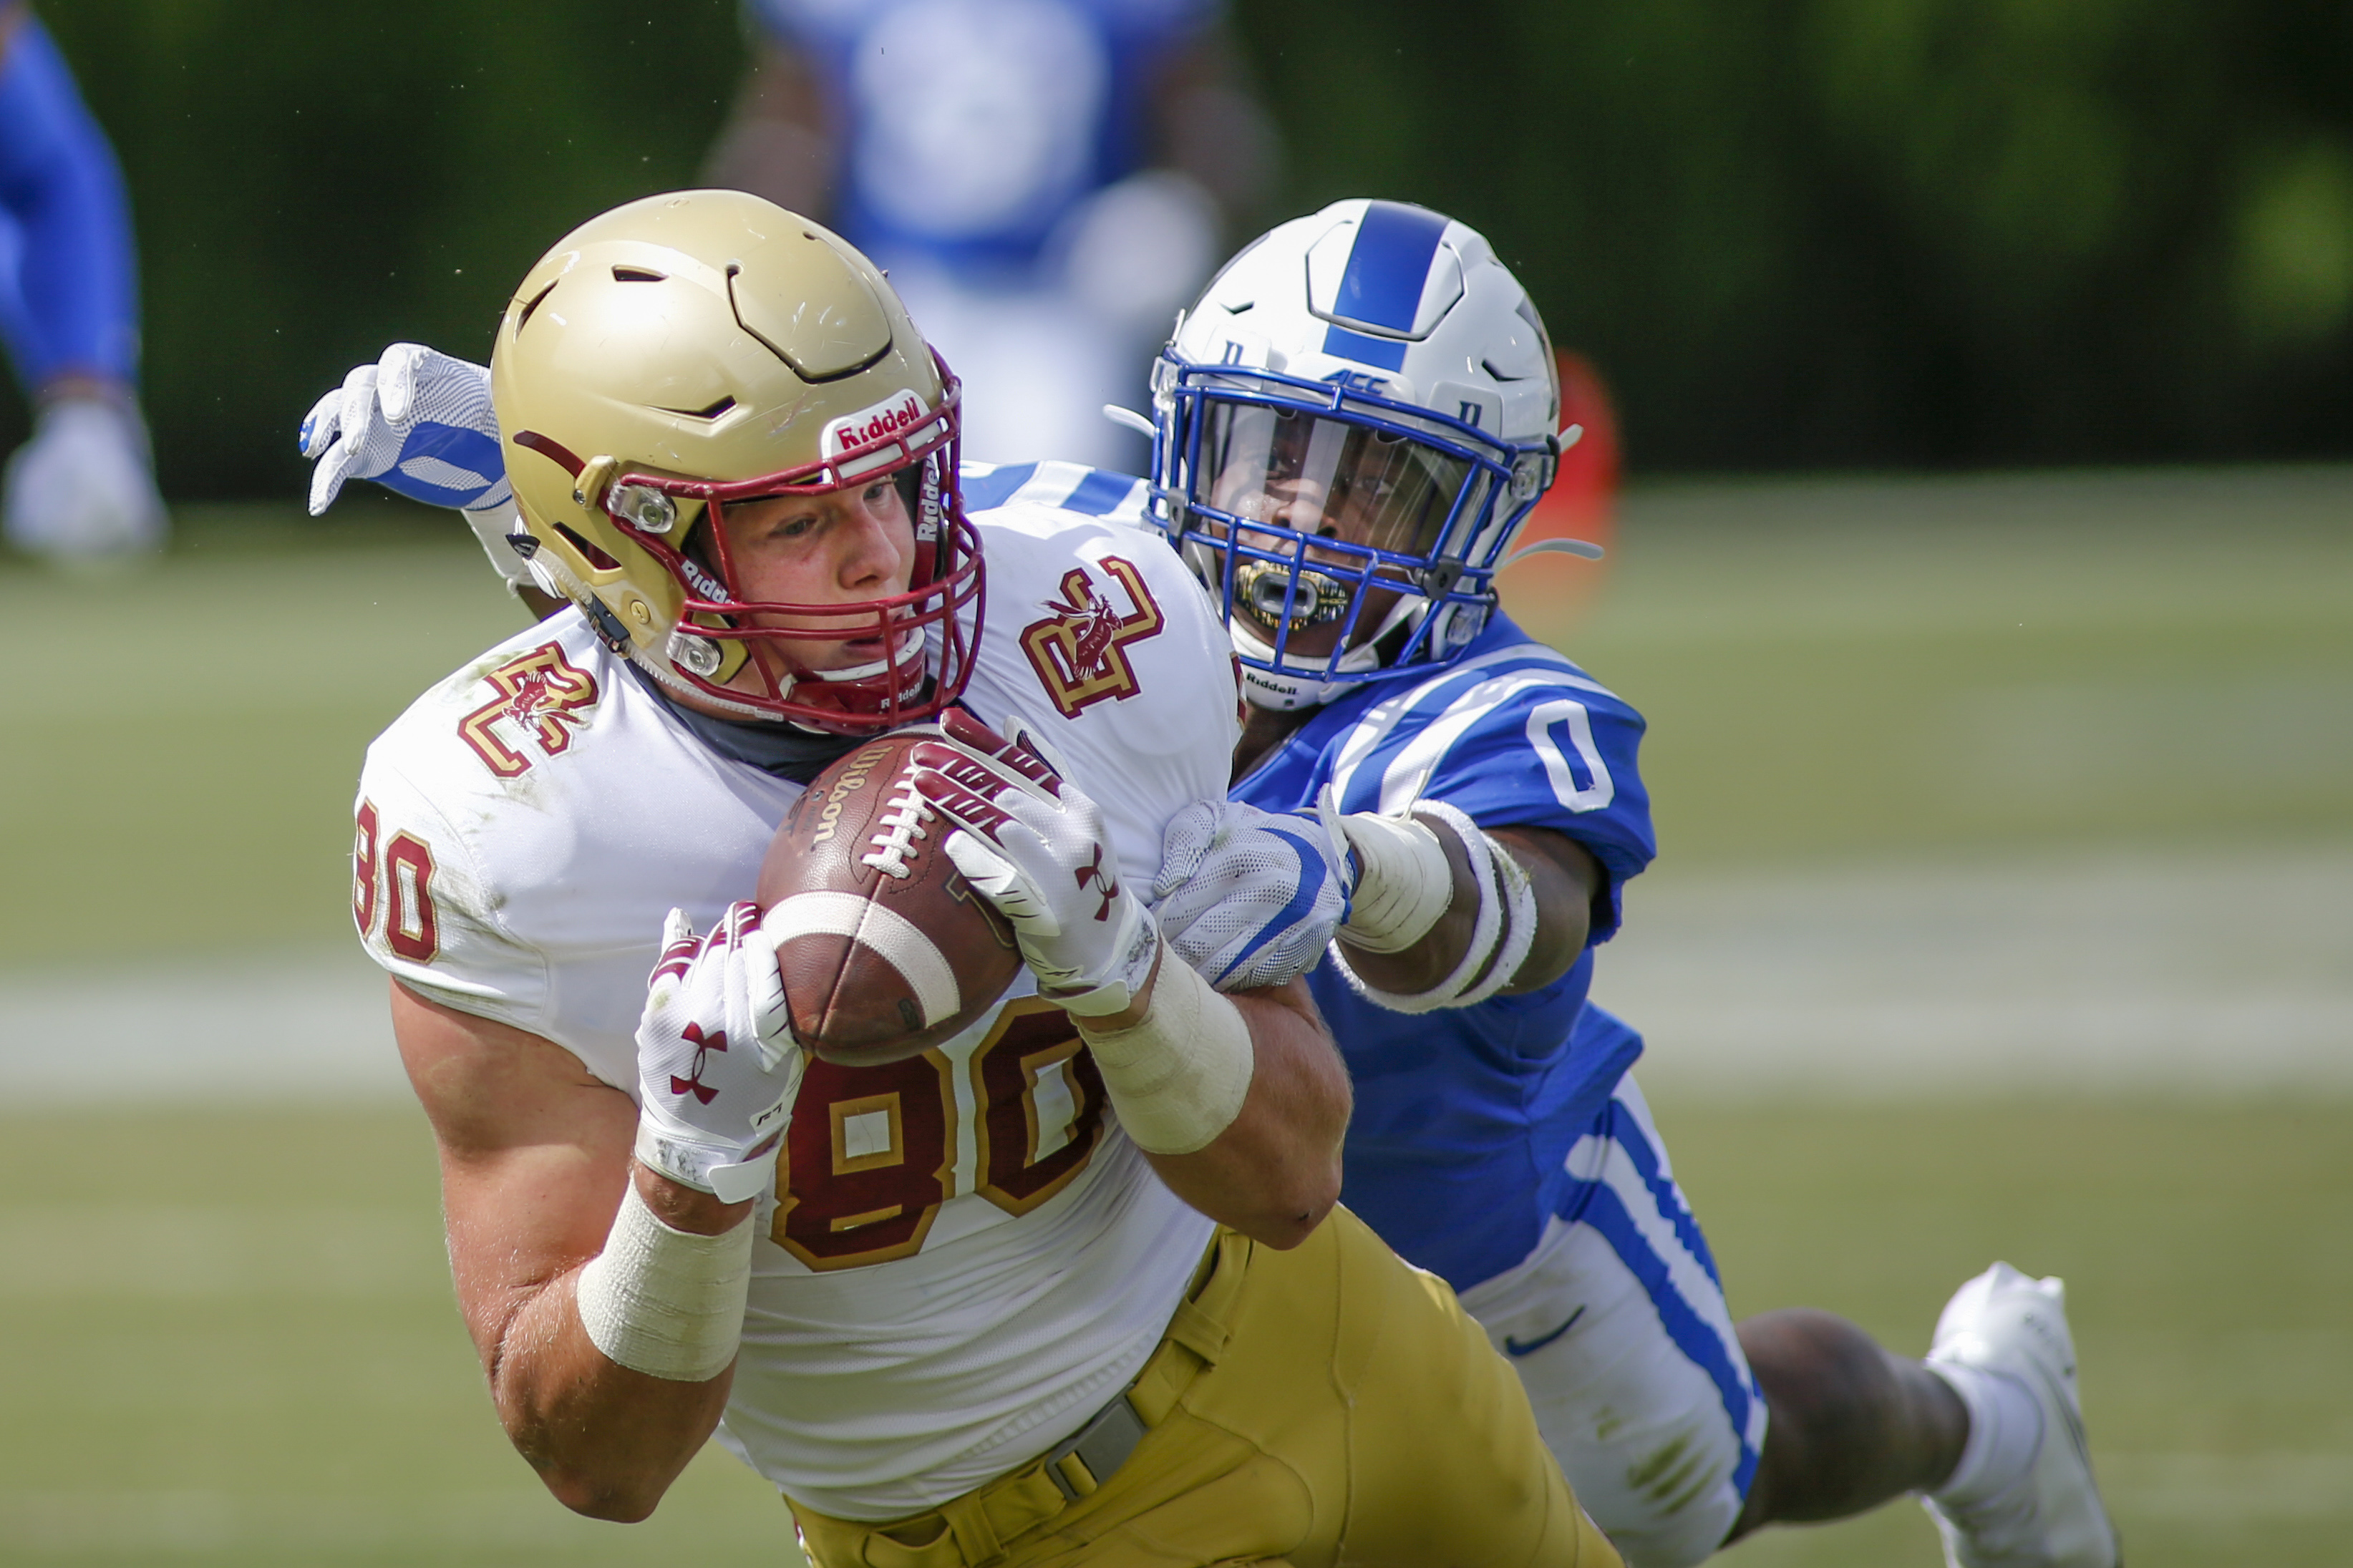 Boston College Eagles tight end Hunter Long (80) catches a pass against Duke Blue Devils safety Marquis Waters in the fourth quarter at Wallace Wade Stadium. The Boston College Eagles won 26-6.